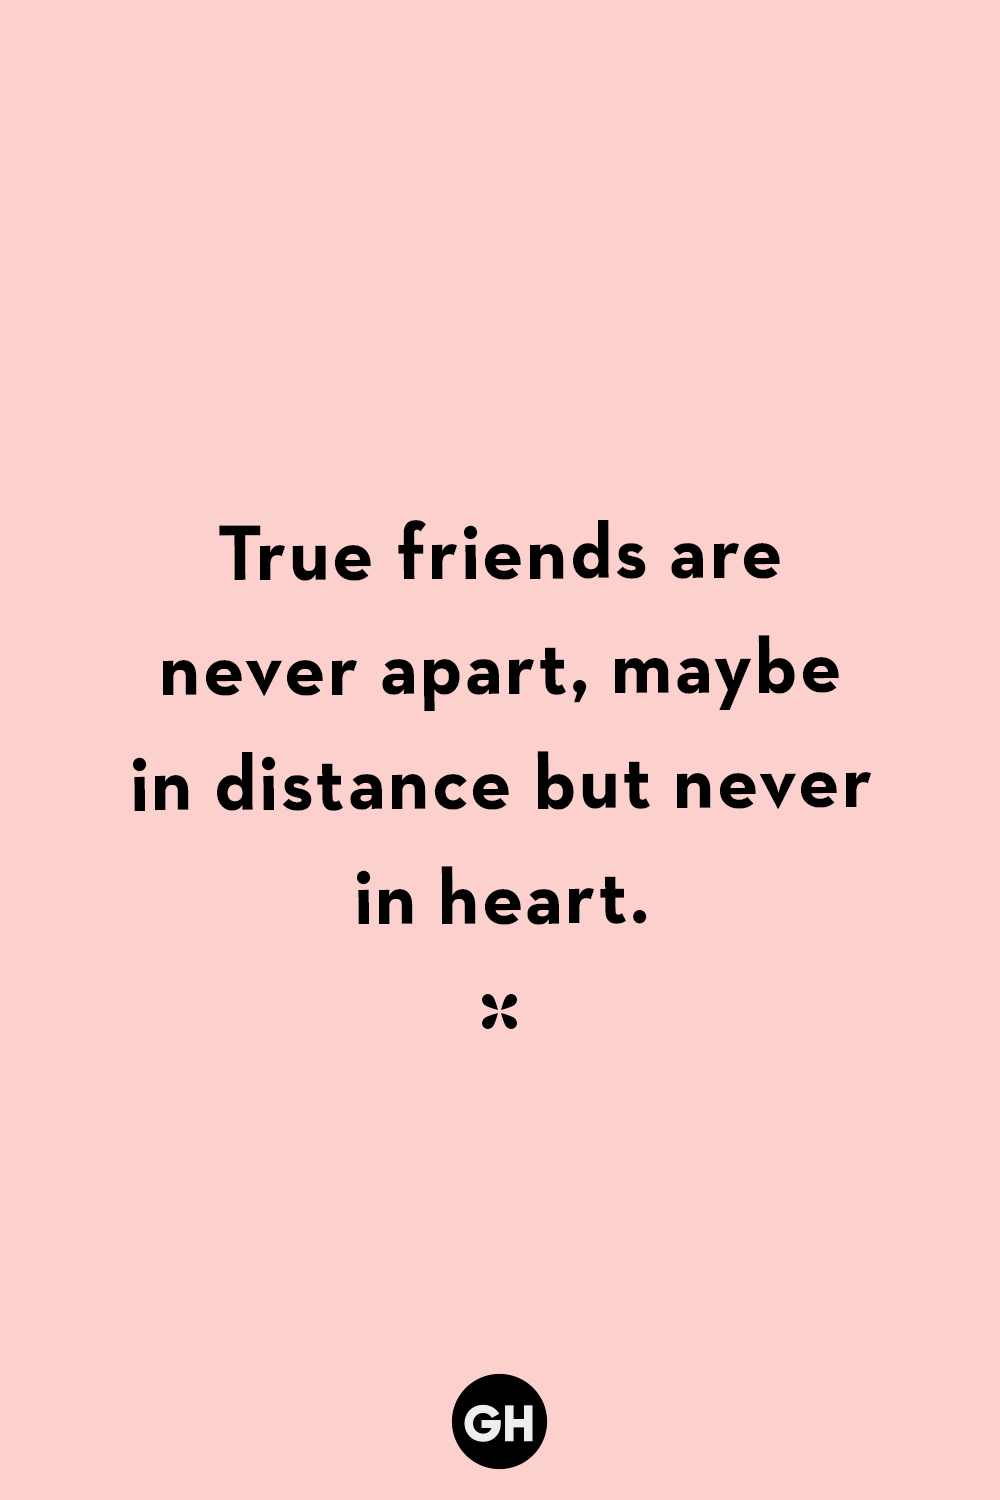 Love images quotes and friendship 52 Best